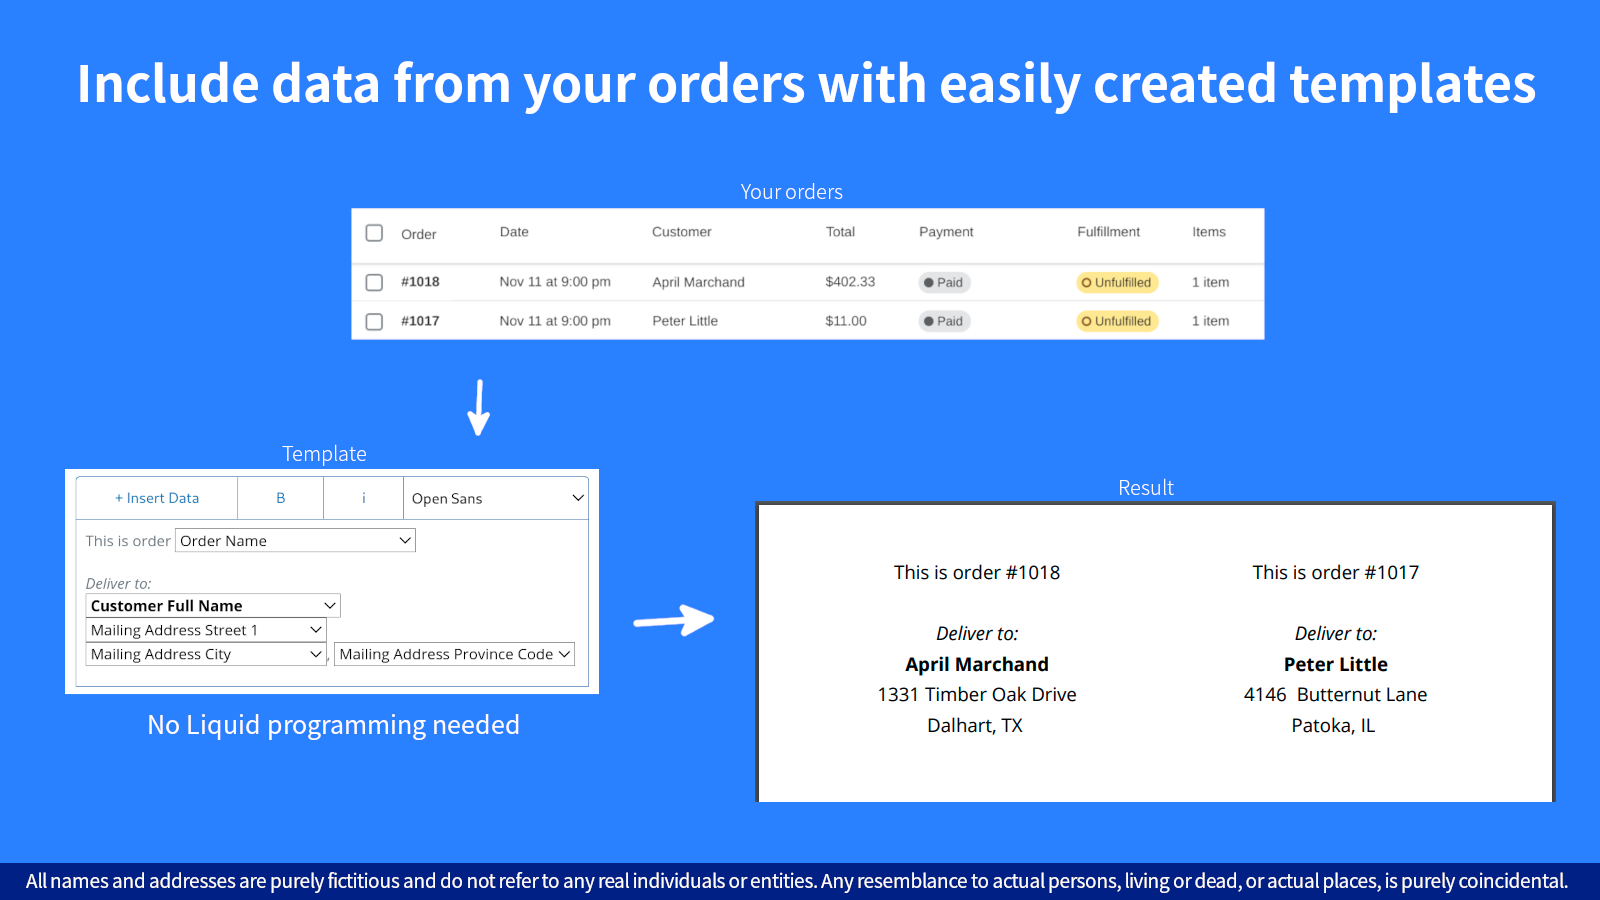 Include data from your orders with easily created templates